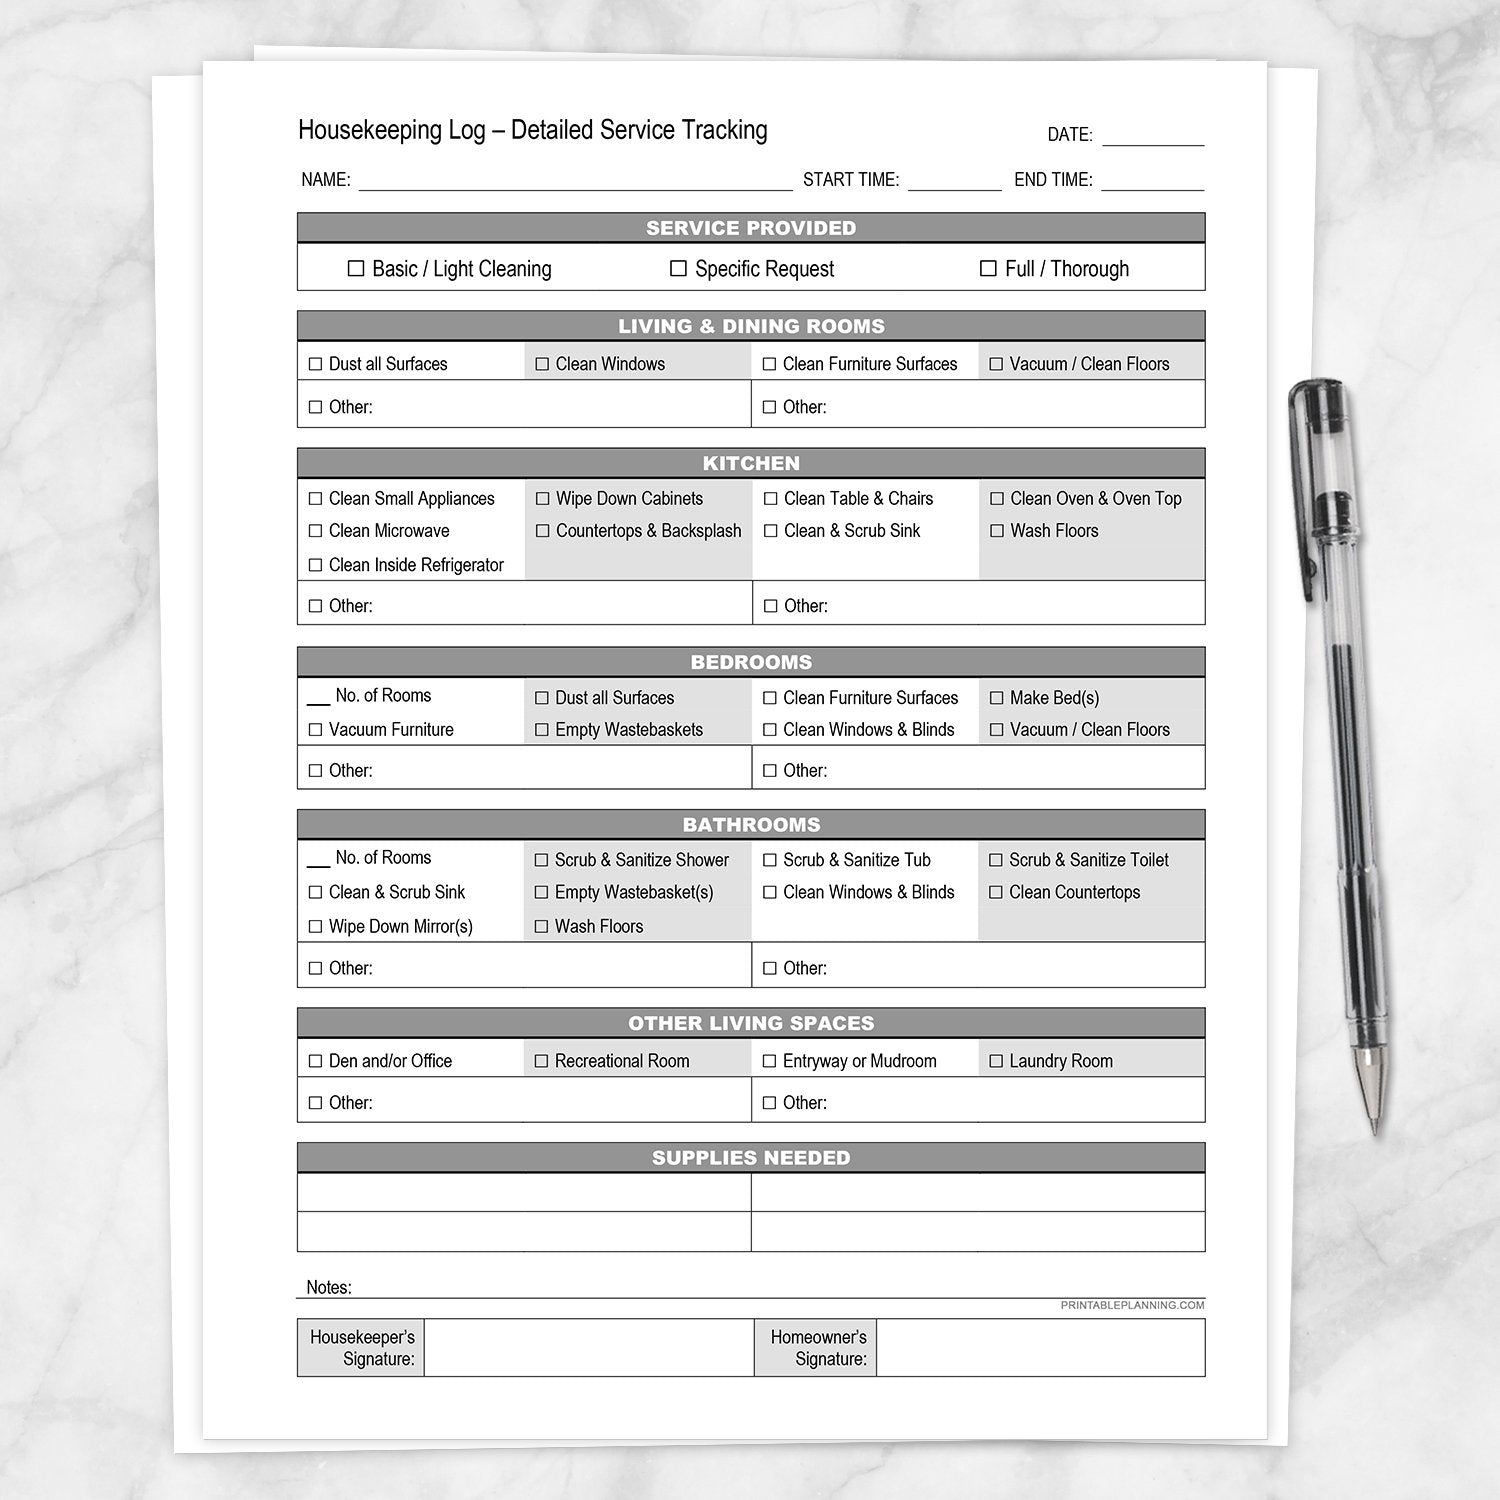 Printable Housekeeping Log - Detailed Cleaning Service Tracking at Printable Planning